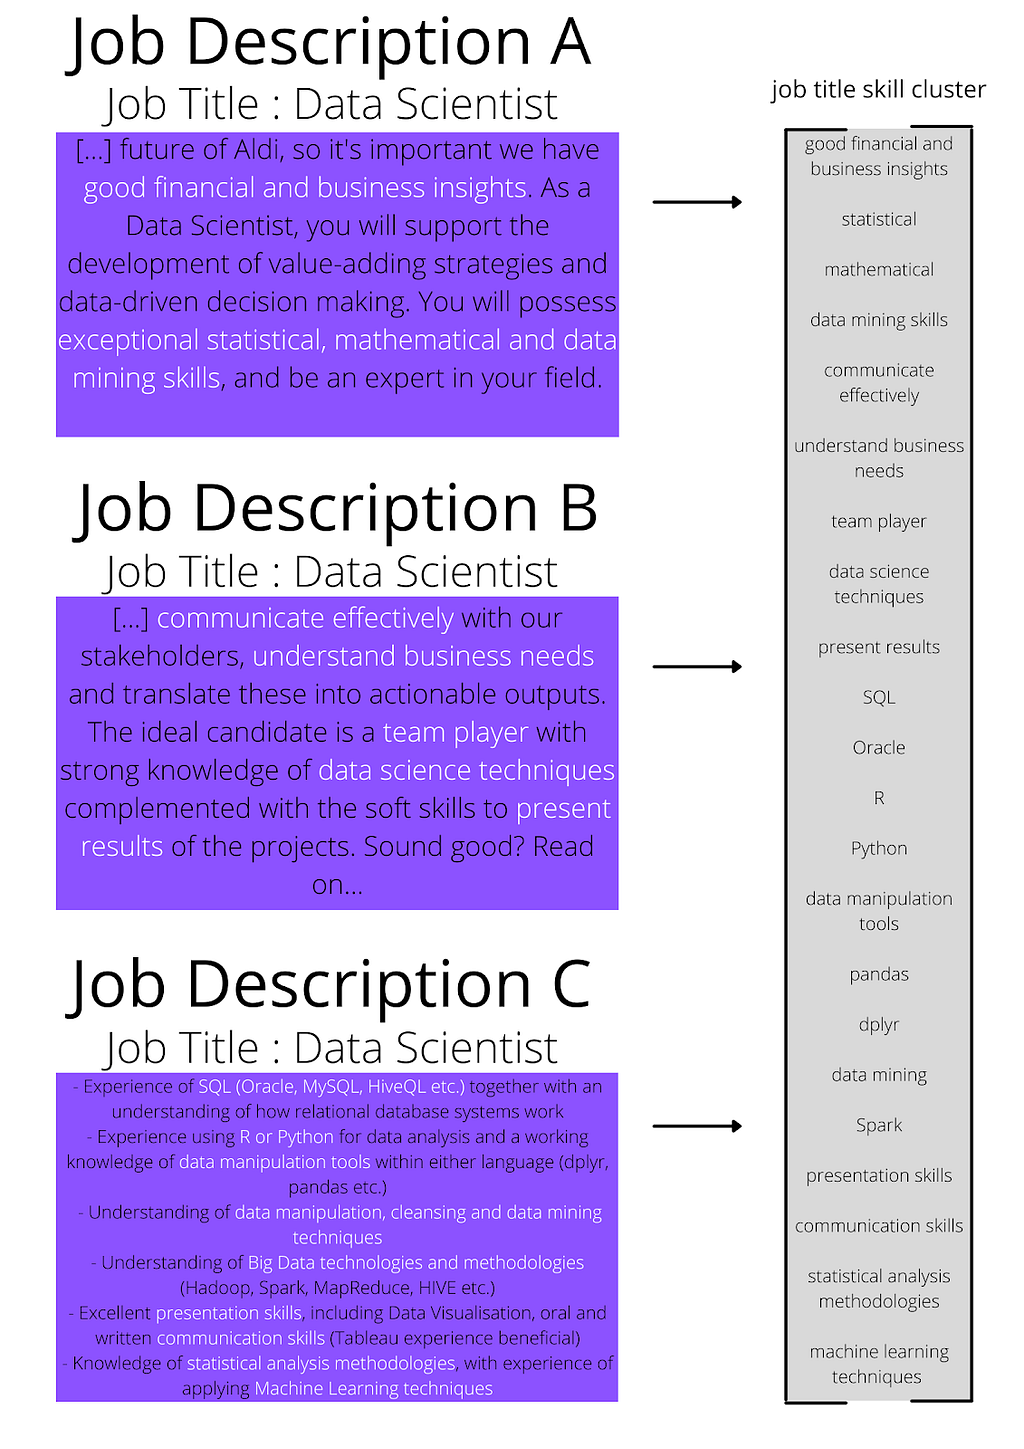 Job descriptions and their associated and likely different skills descriptions.